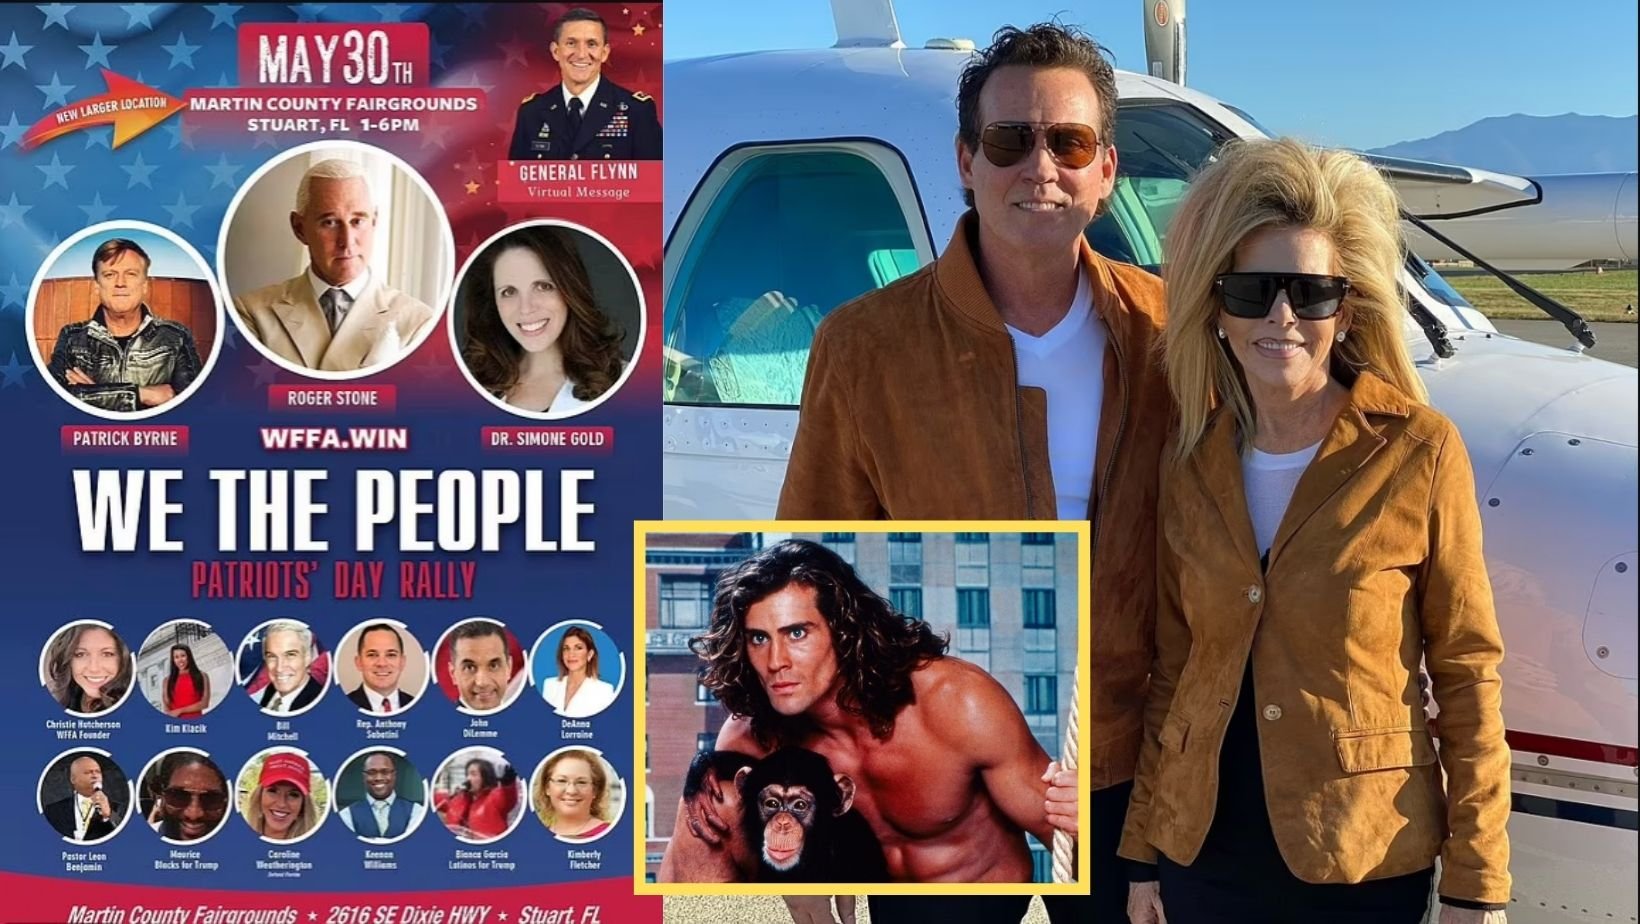 1 4.jpg?resize=412,232 - 90s Tarzan Actor Joe Lara, His Wife & Five Others 'Were En Route To MAGA Rally' When The Plane Crashed